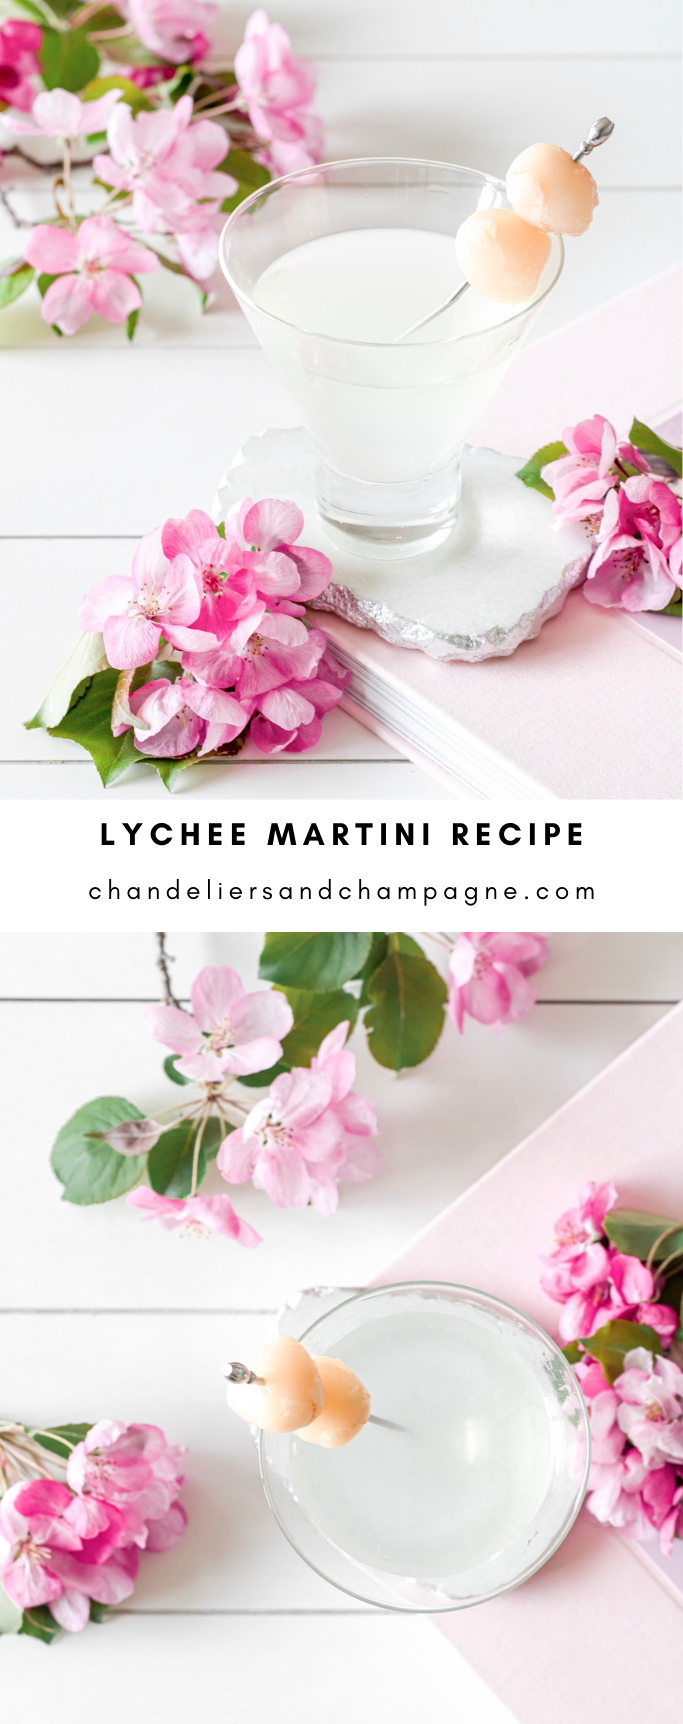 Lychee Martini Recipe with SOHO, Grey Goose, lychee juice and lime